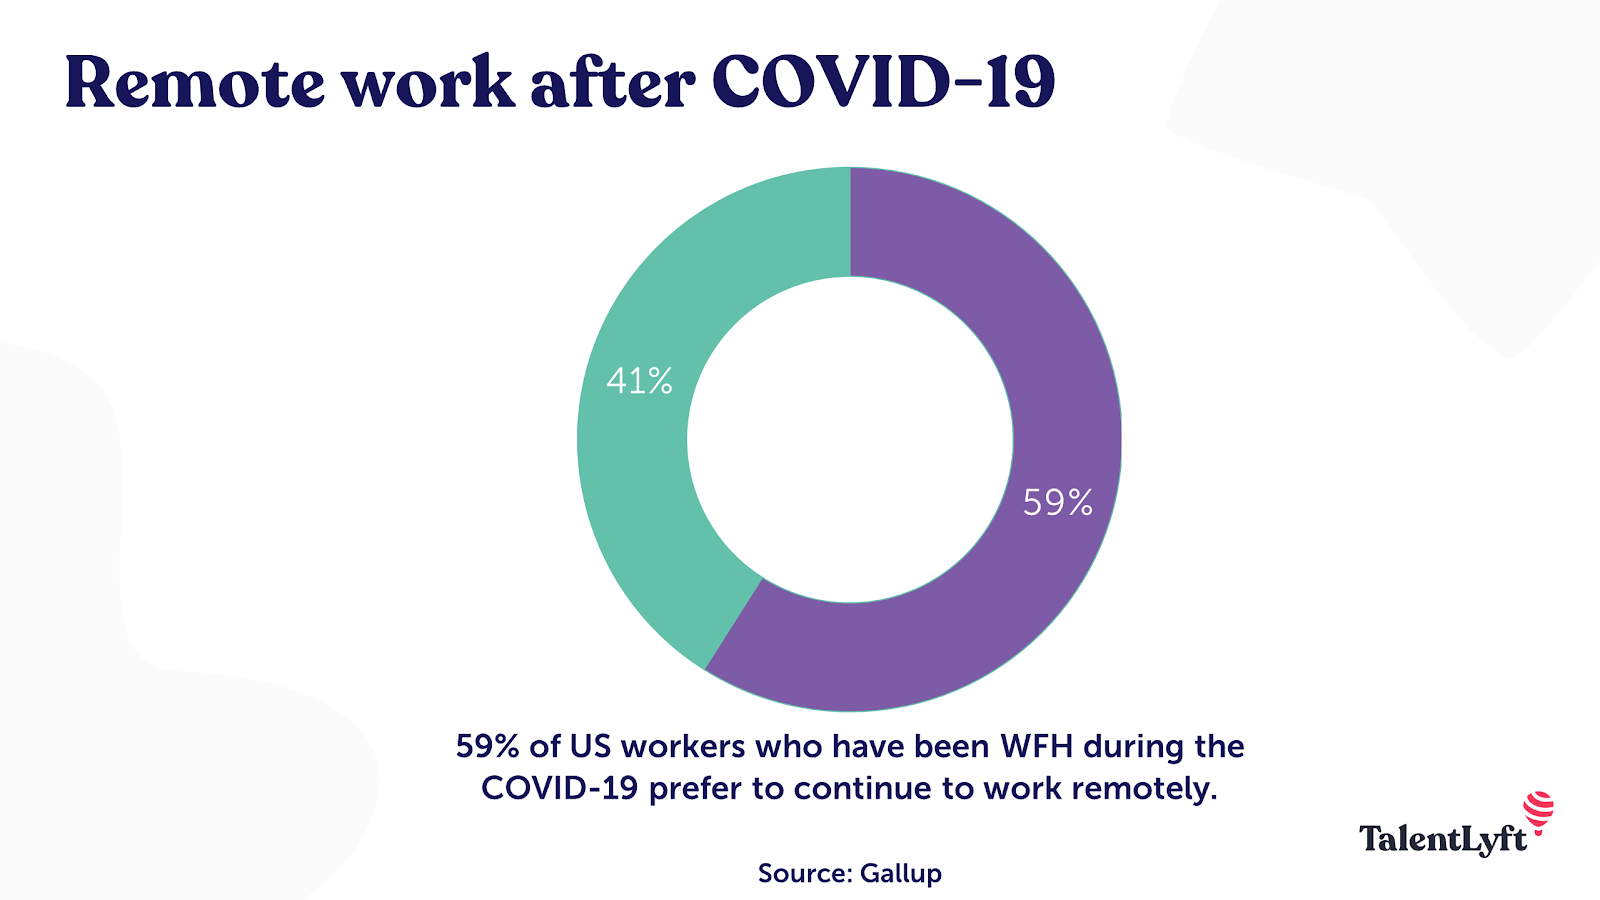 Remote work sfter COVID-19: How many people want to keep working remotely?